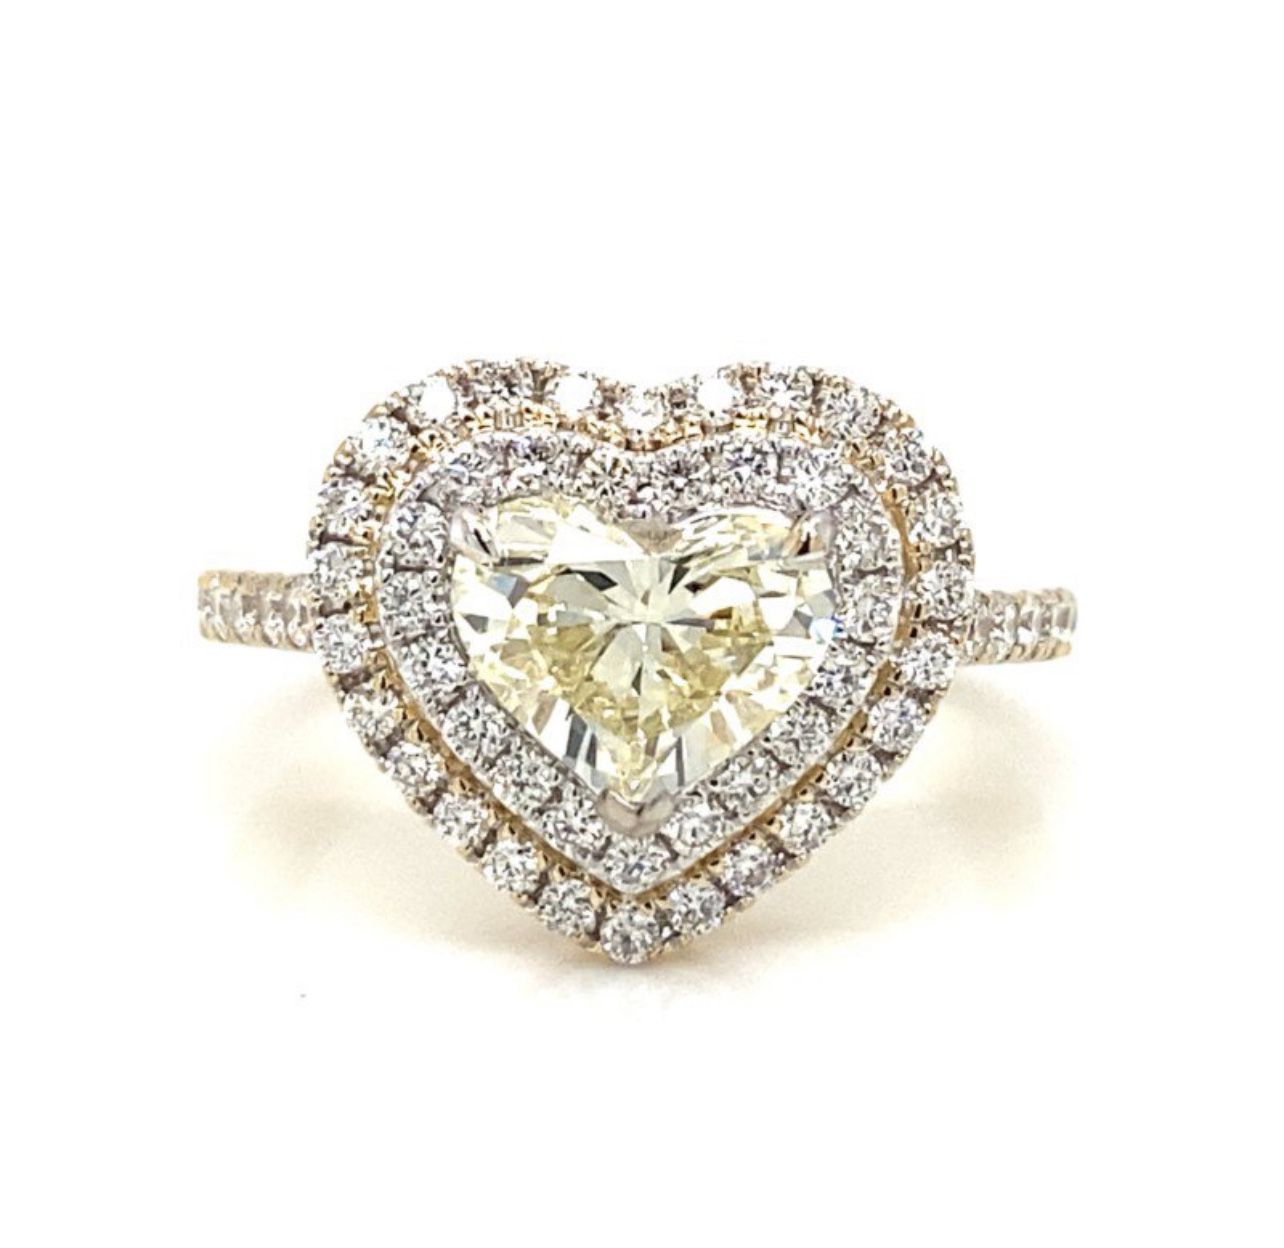 Designs 18K Double Halo Diamond Ring 💍❤️🤙🏾  18K yellow gold diamond ring. The center is set with a 1.23 carat heart shaped diamond, which has a cla